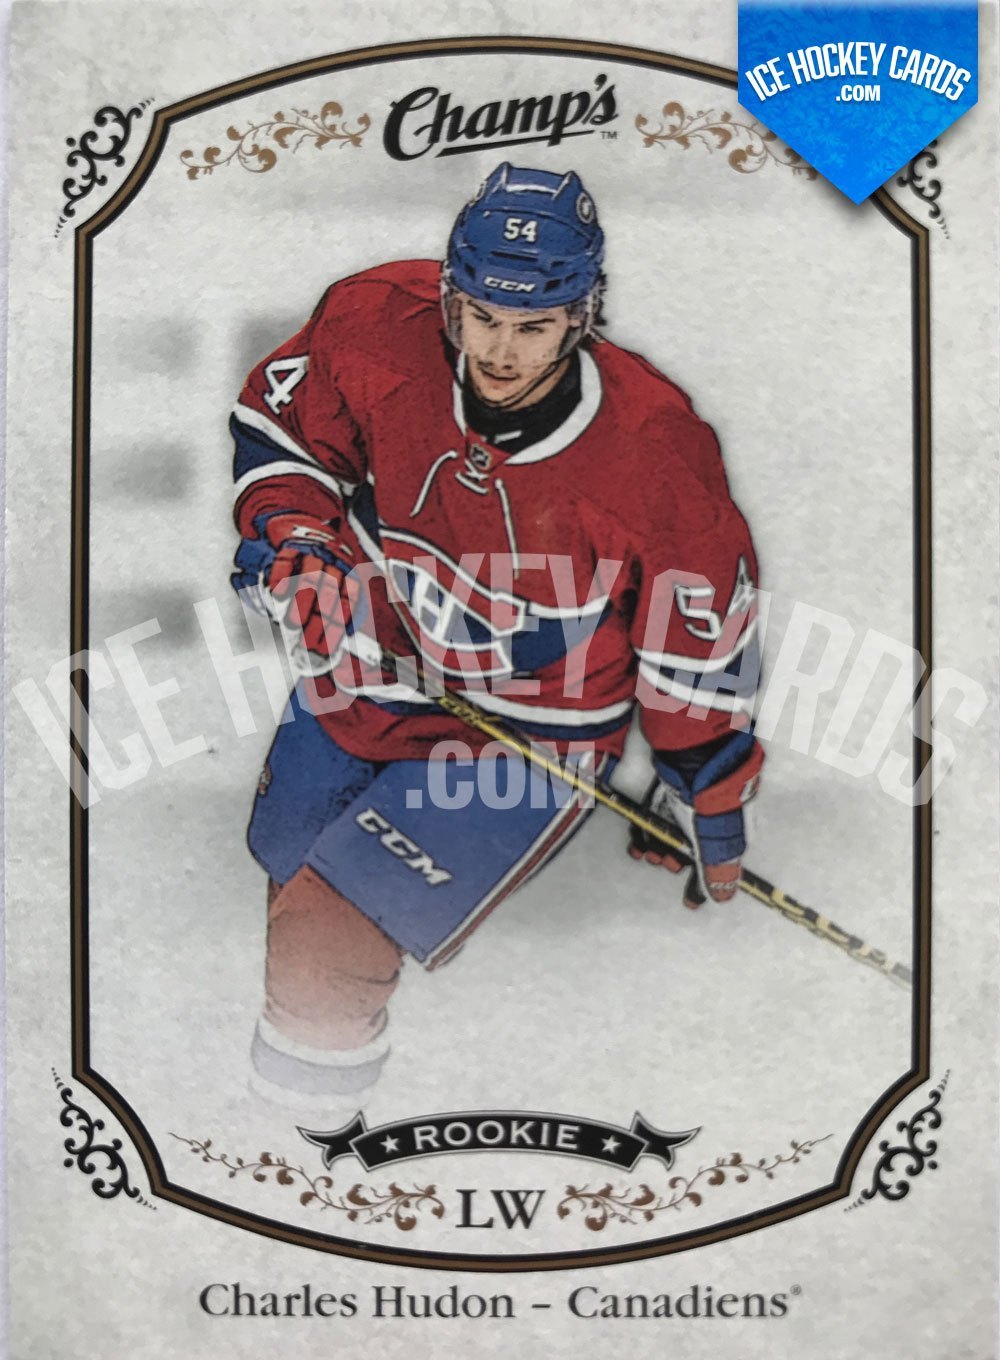 Upper Deck - Champs 15-16 - Charles Hudon Rookie Card